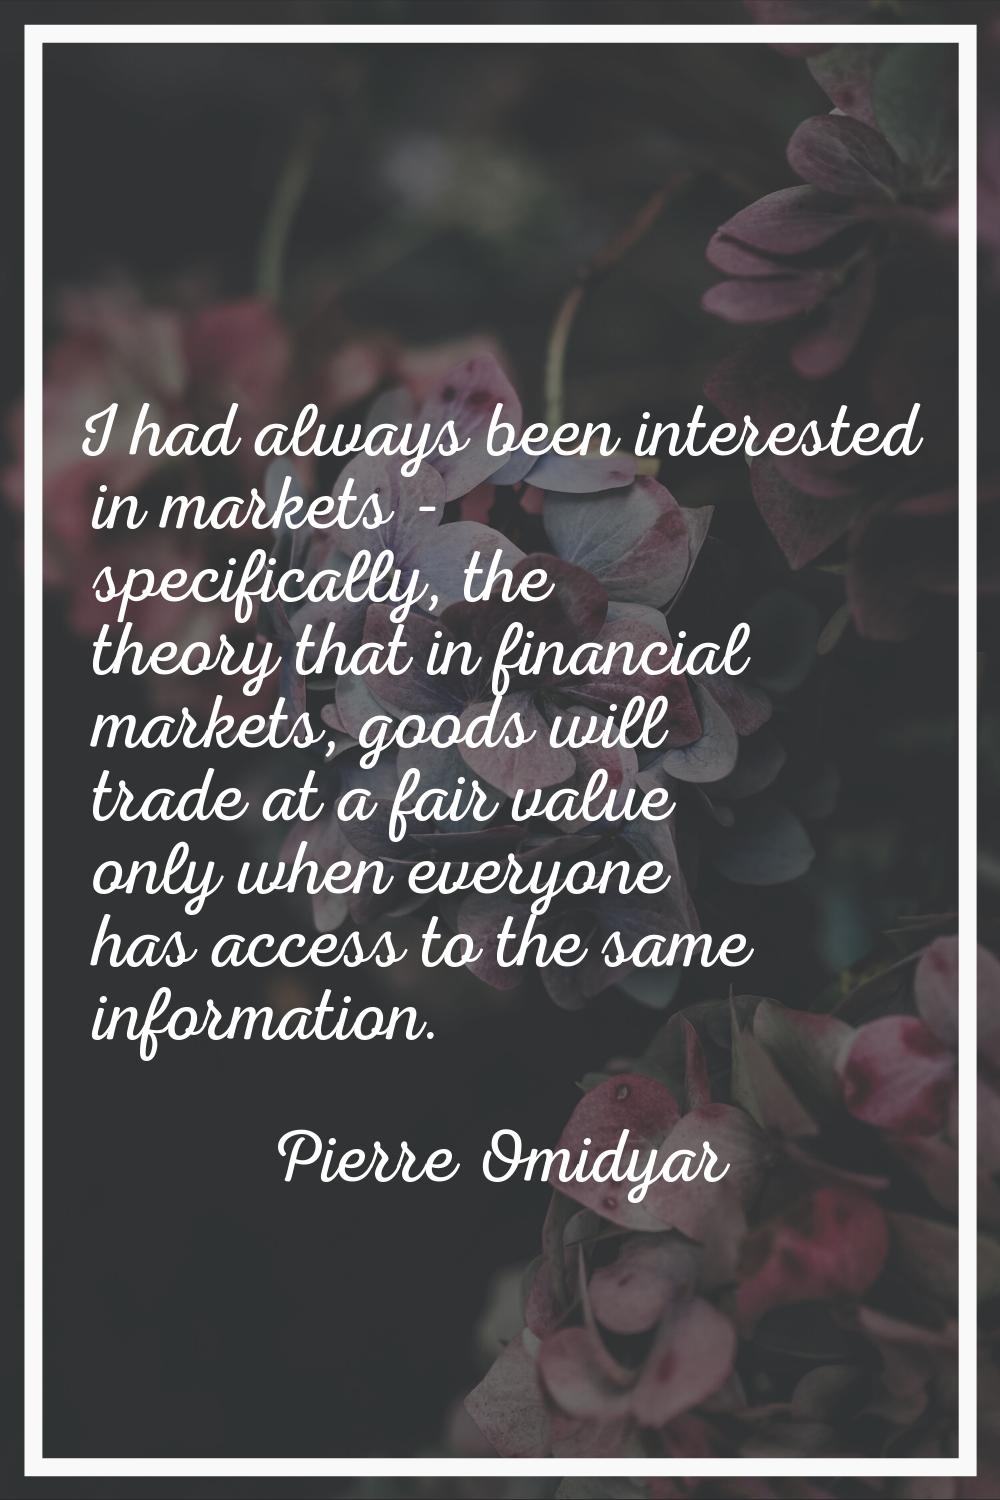 I had always been interested in markets - specifically, the theory that in financial markets, goods